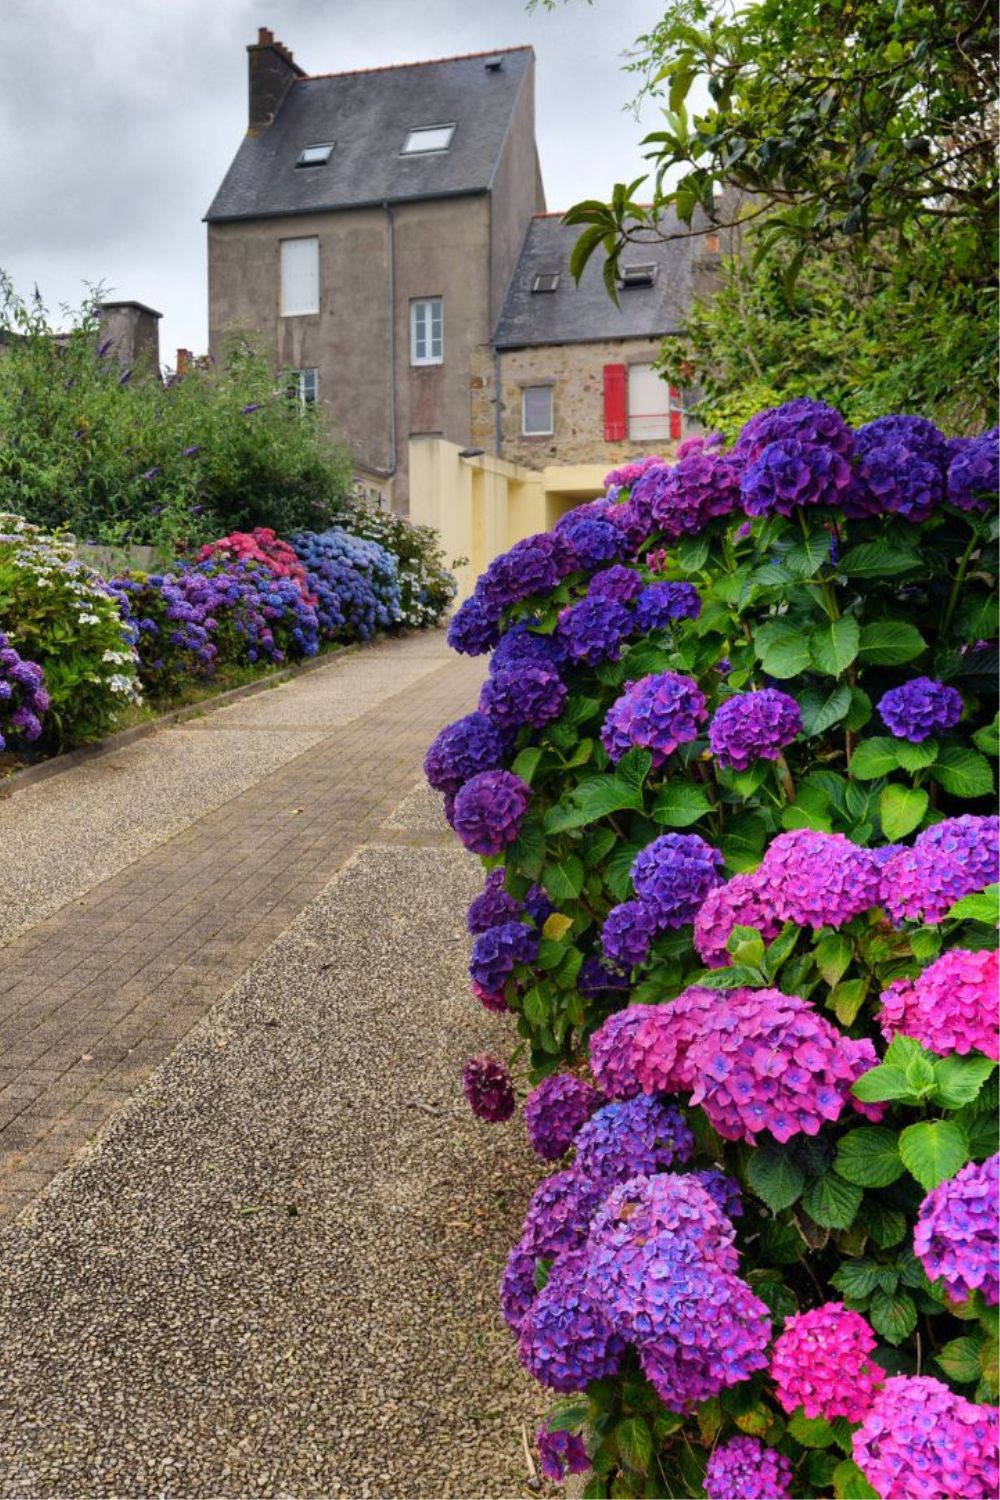 Gorgeous deep purple hydrangeas line a driveaway with an old house in the background.